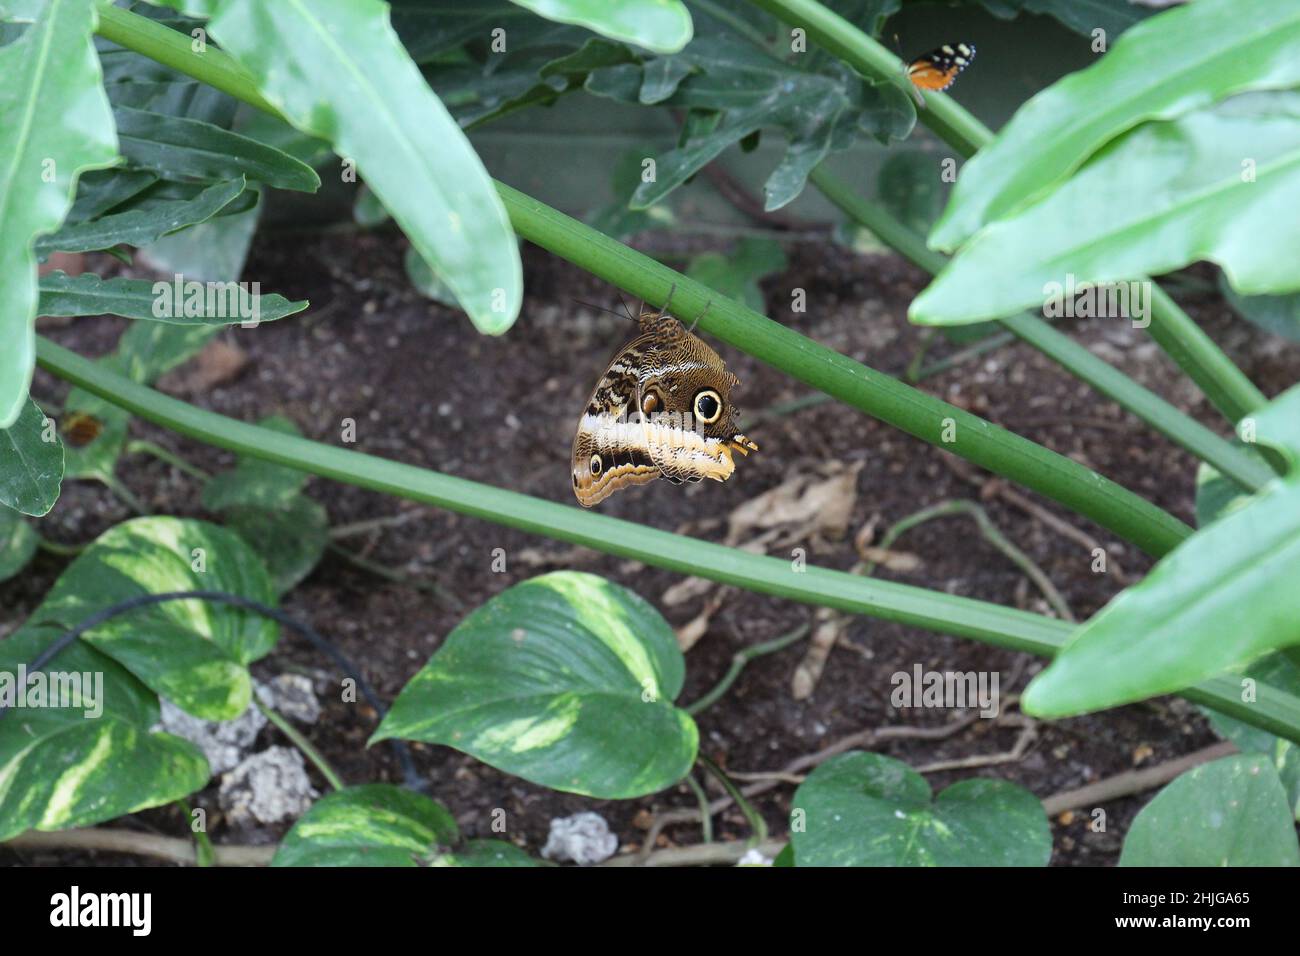 A Cream Striped Owl Butterfly hanging upside down on a stem of a Philodendron plant Stock Photo